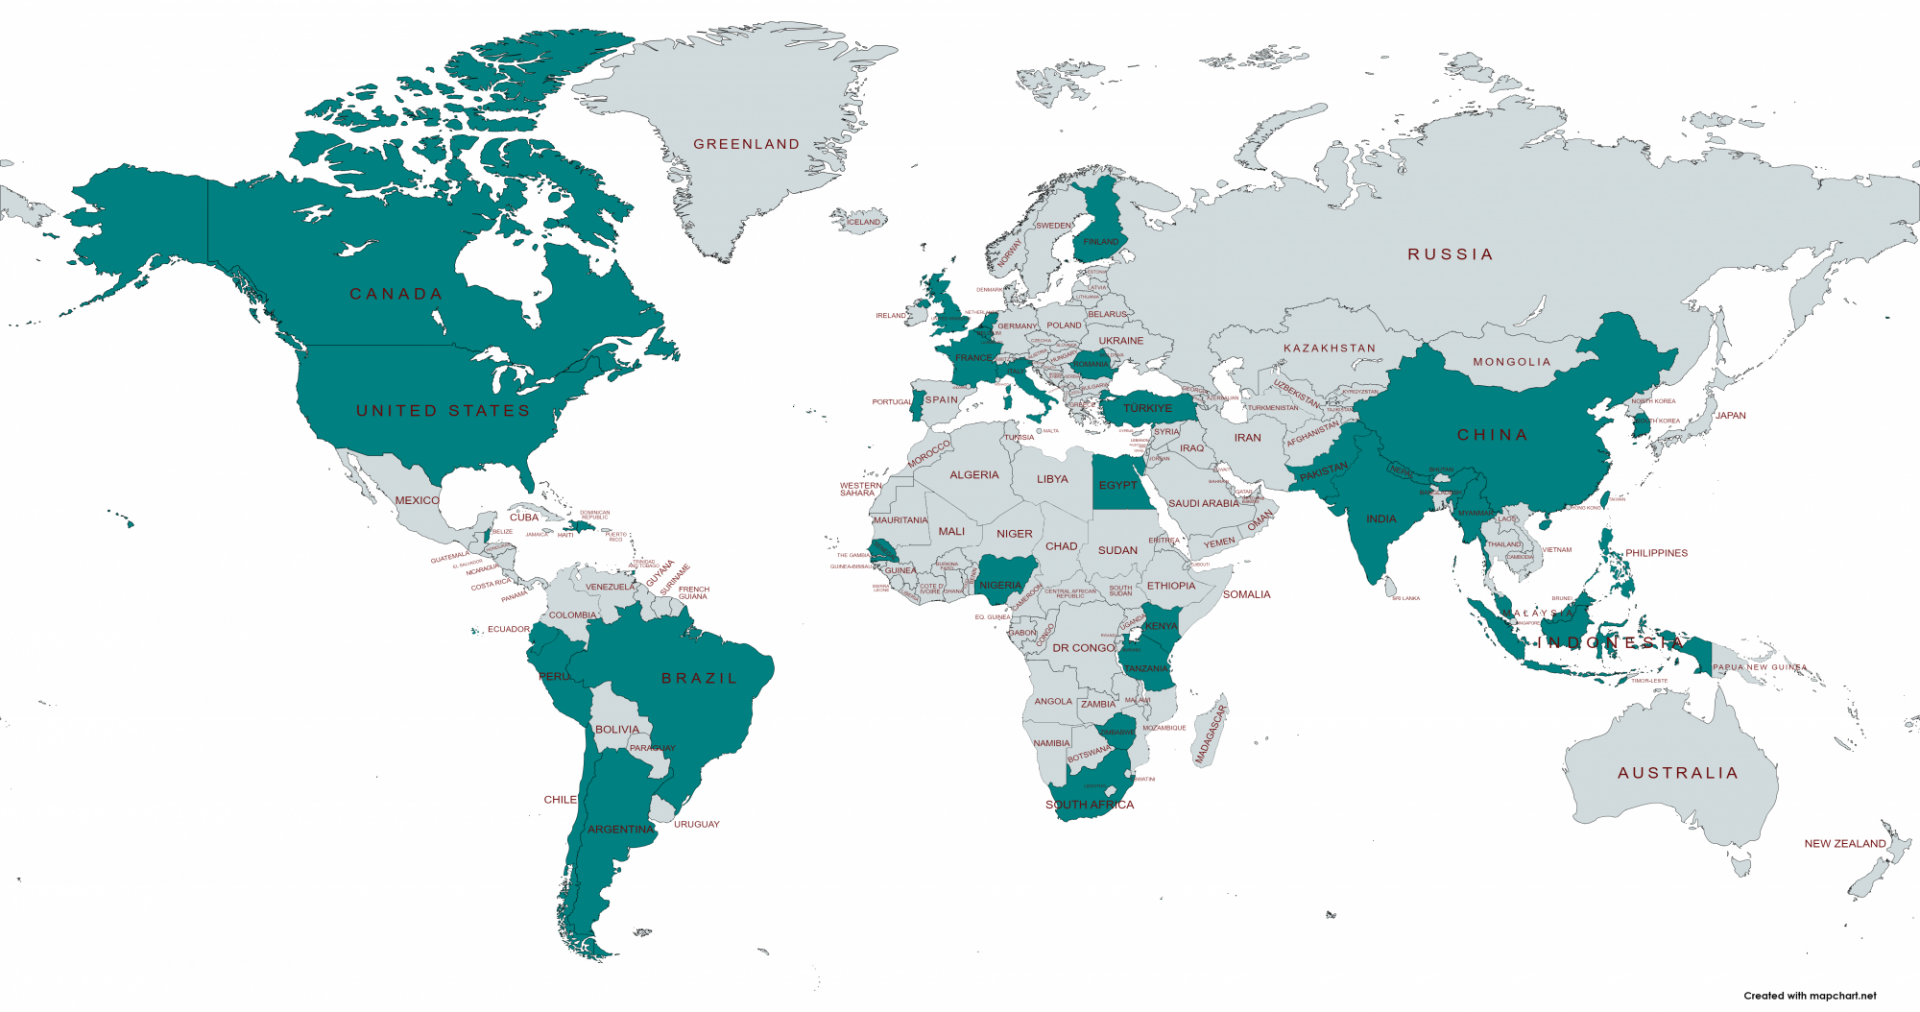 map of the world showing the 36 countries where CIC members reside.